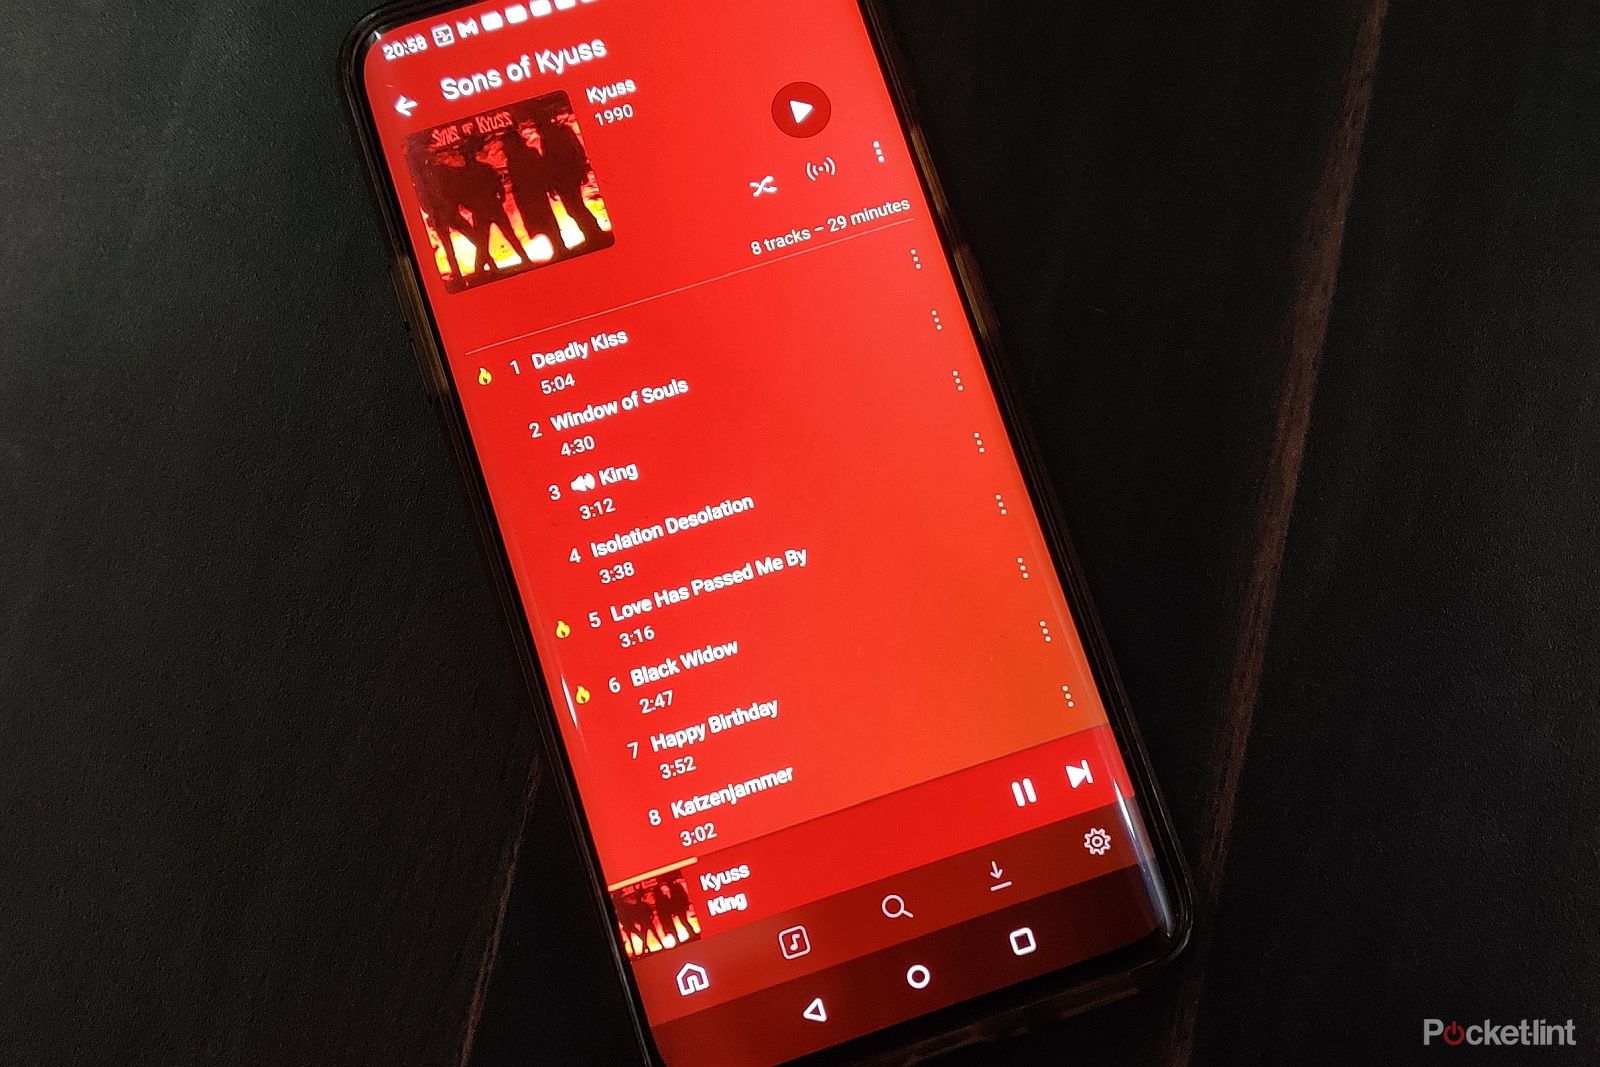 Plexamp on an Android phone